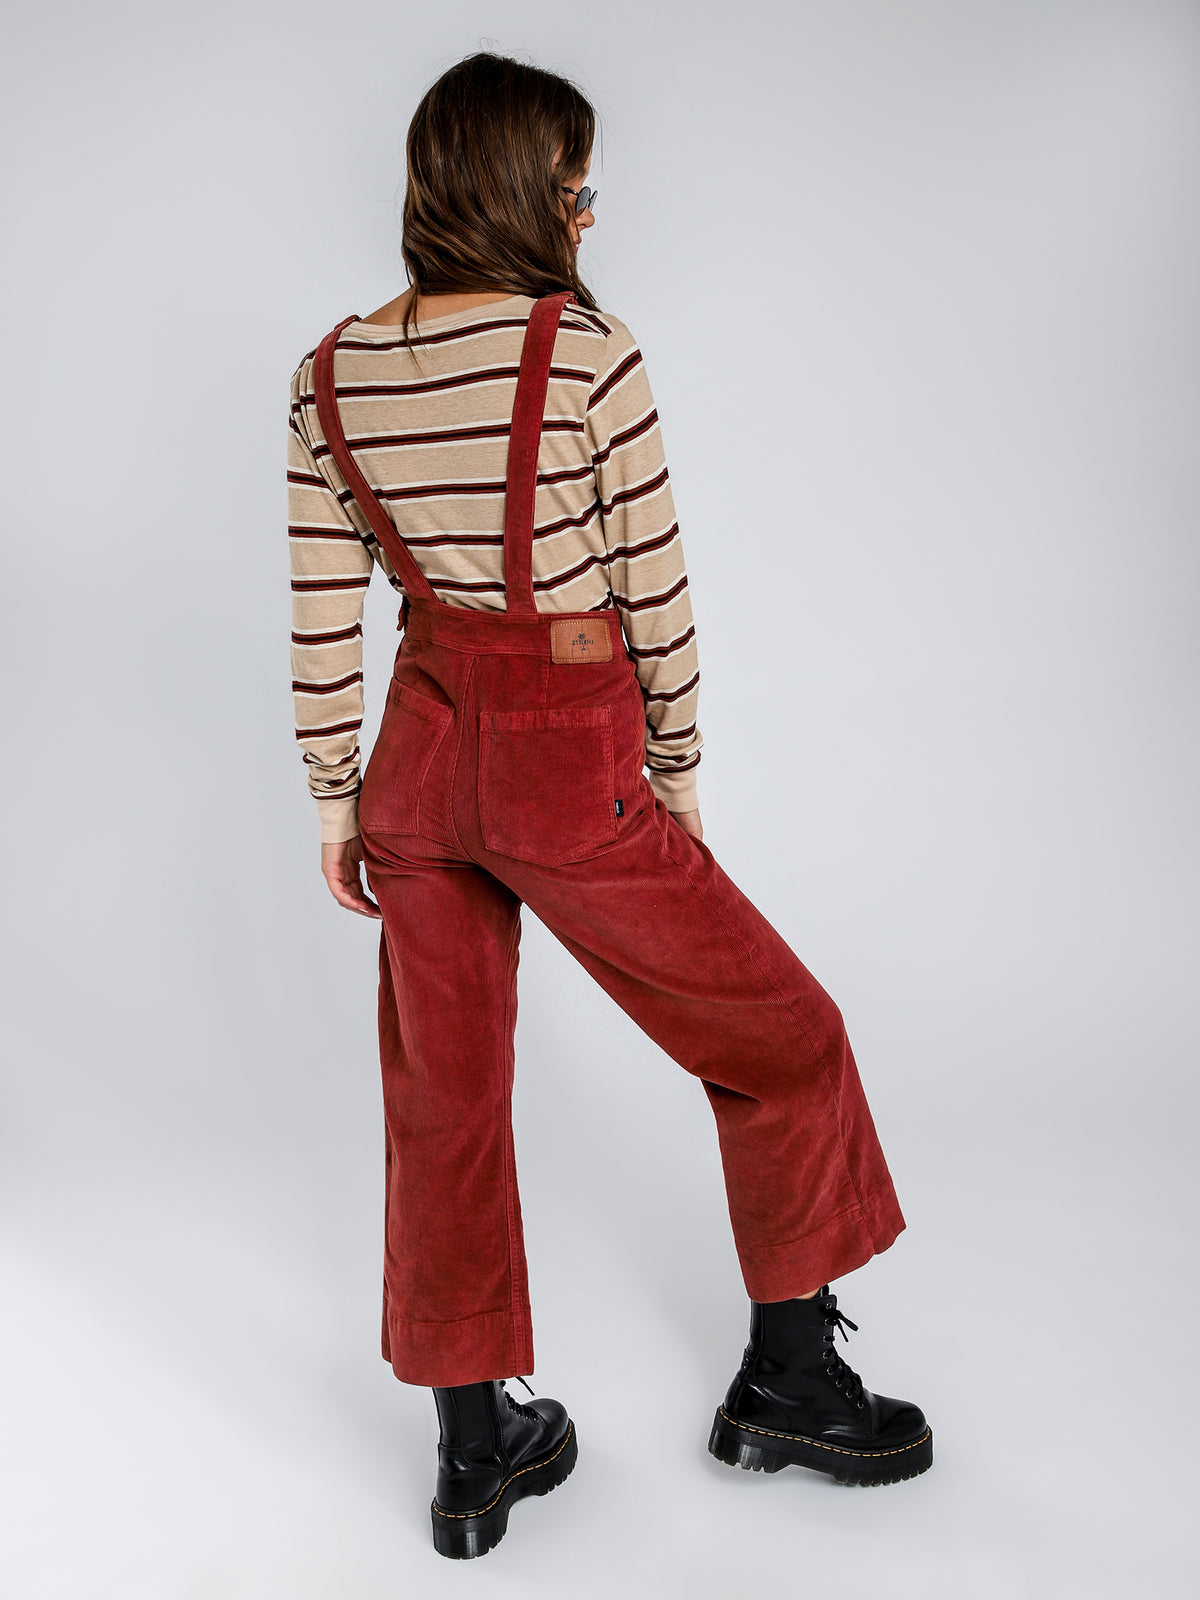 Belle Overalls in Blood Red Corduroy